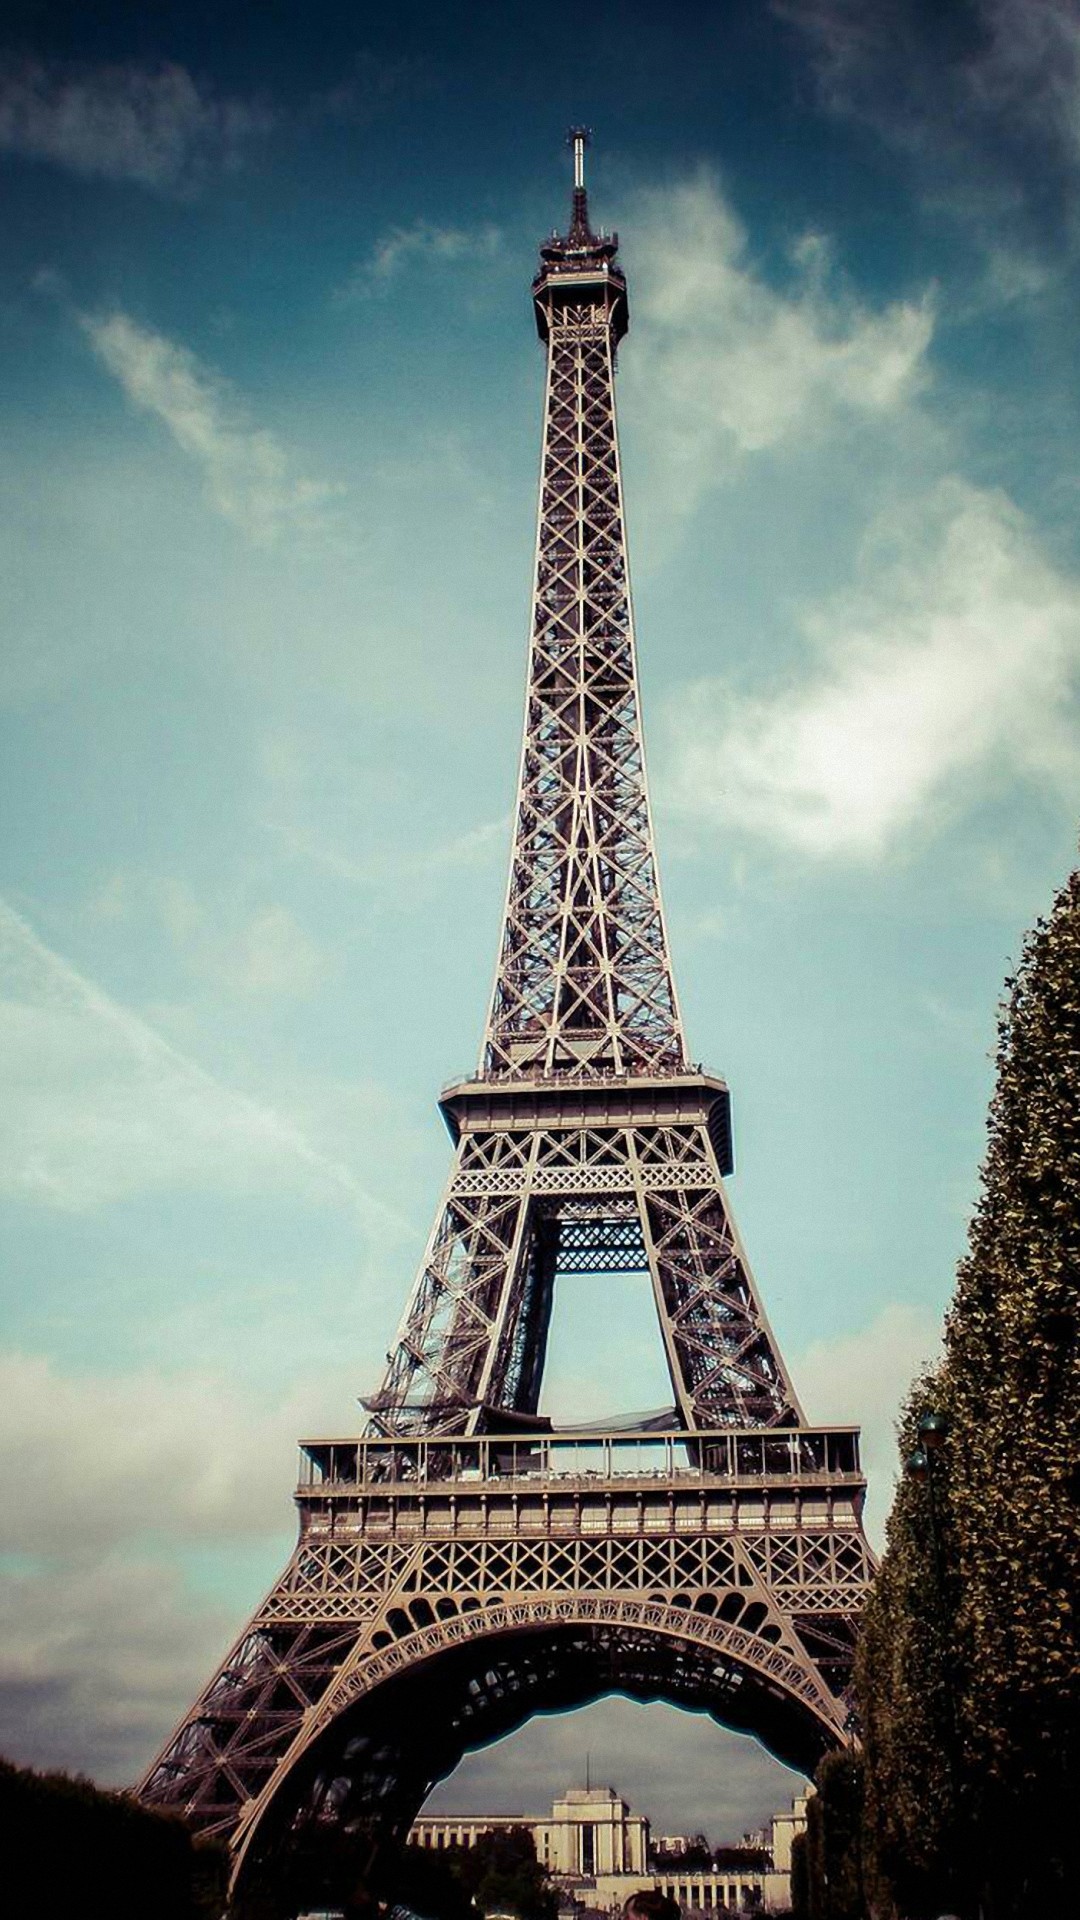 Paris Eiffel Tower. Tap to see more City Landscape iPhone wallpapers, backgrounds, fondos